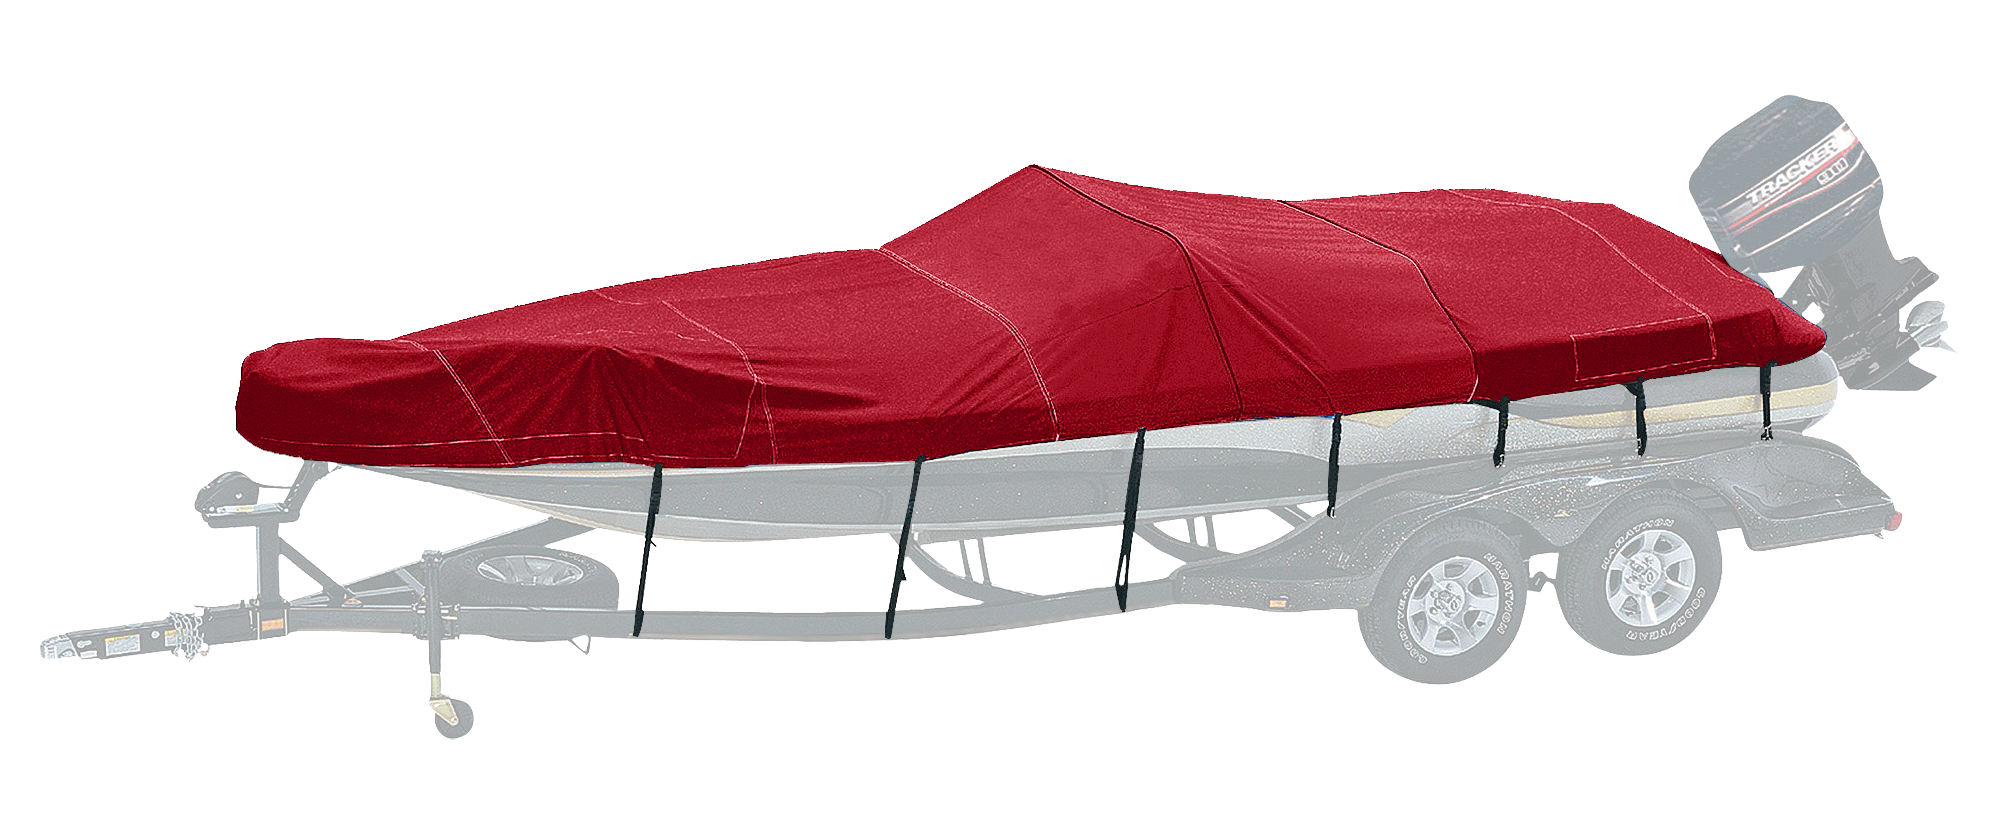 Bass Pro Shops Exact Fit Custom Boat Cover by Westland - Tracker Boats - '04-'05 Tundra 20 Sport - Burgundy